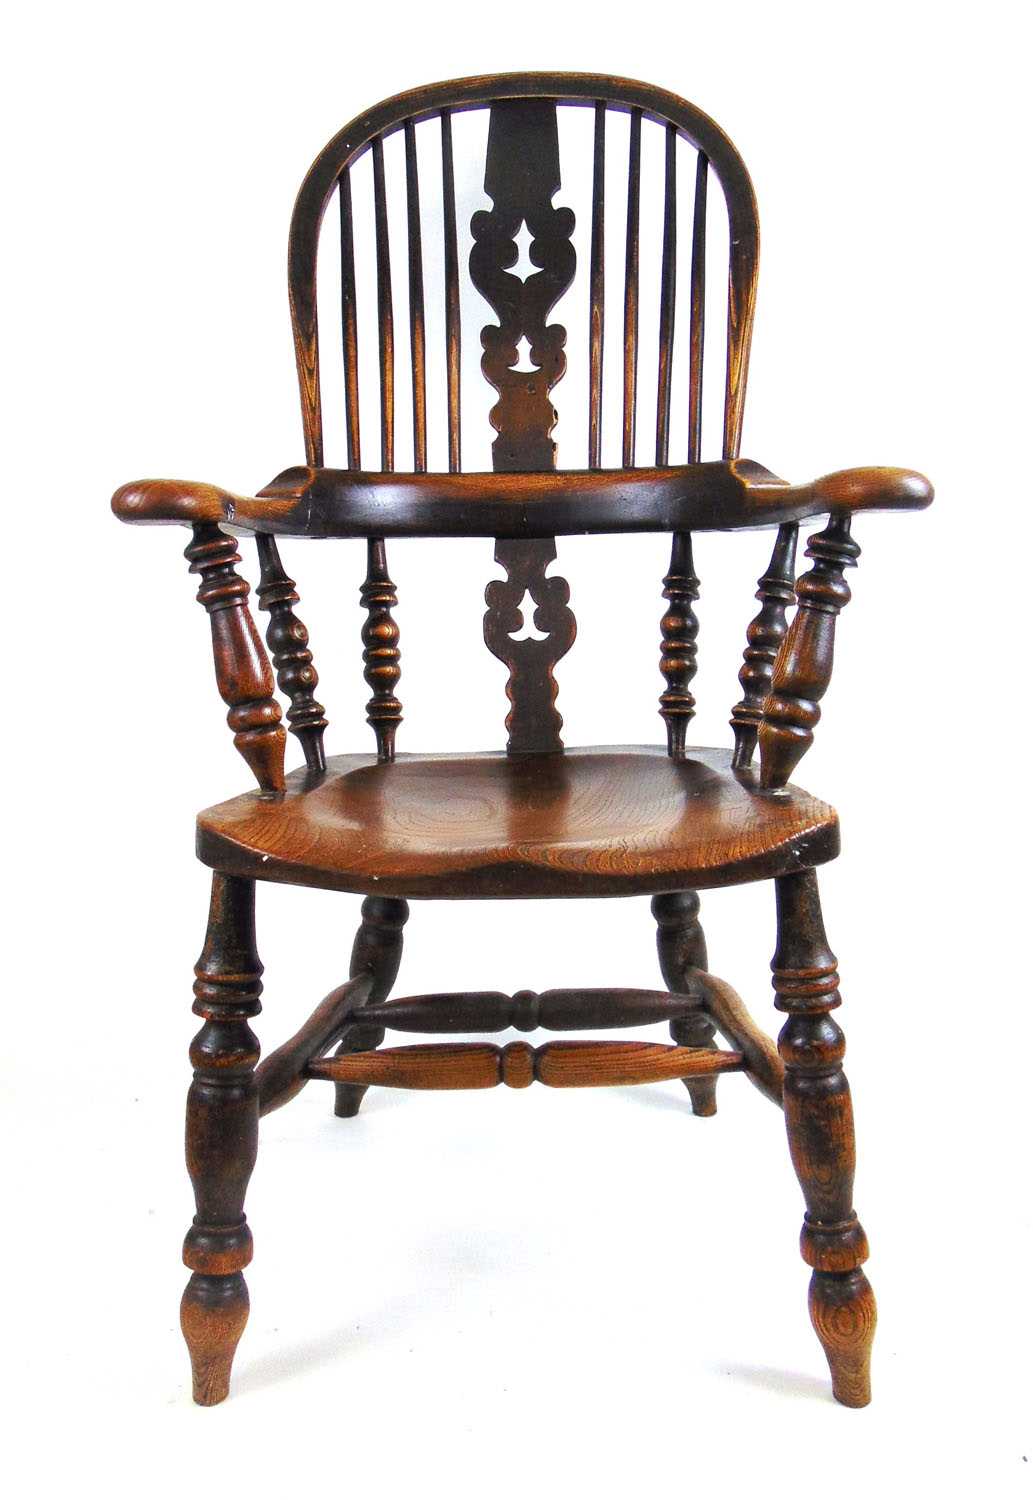 A 19th century ash and elm Windsor chair, the hoop back with pierced splat and turned supports